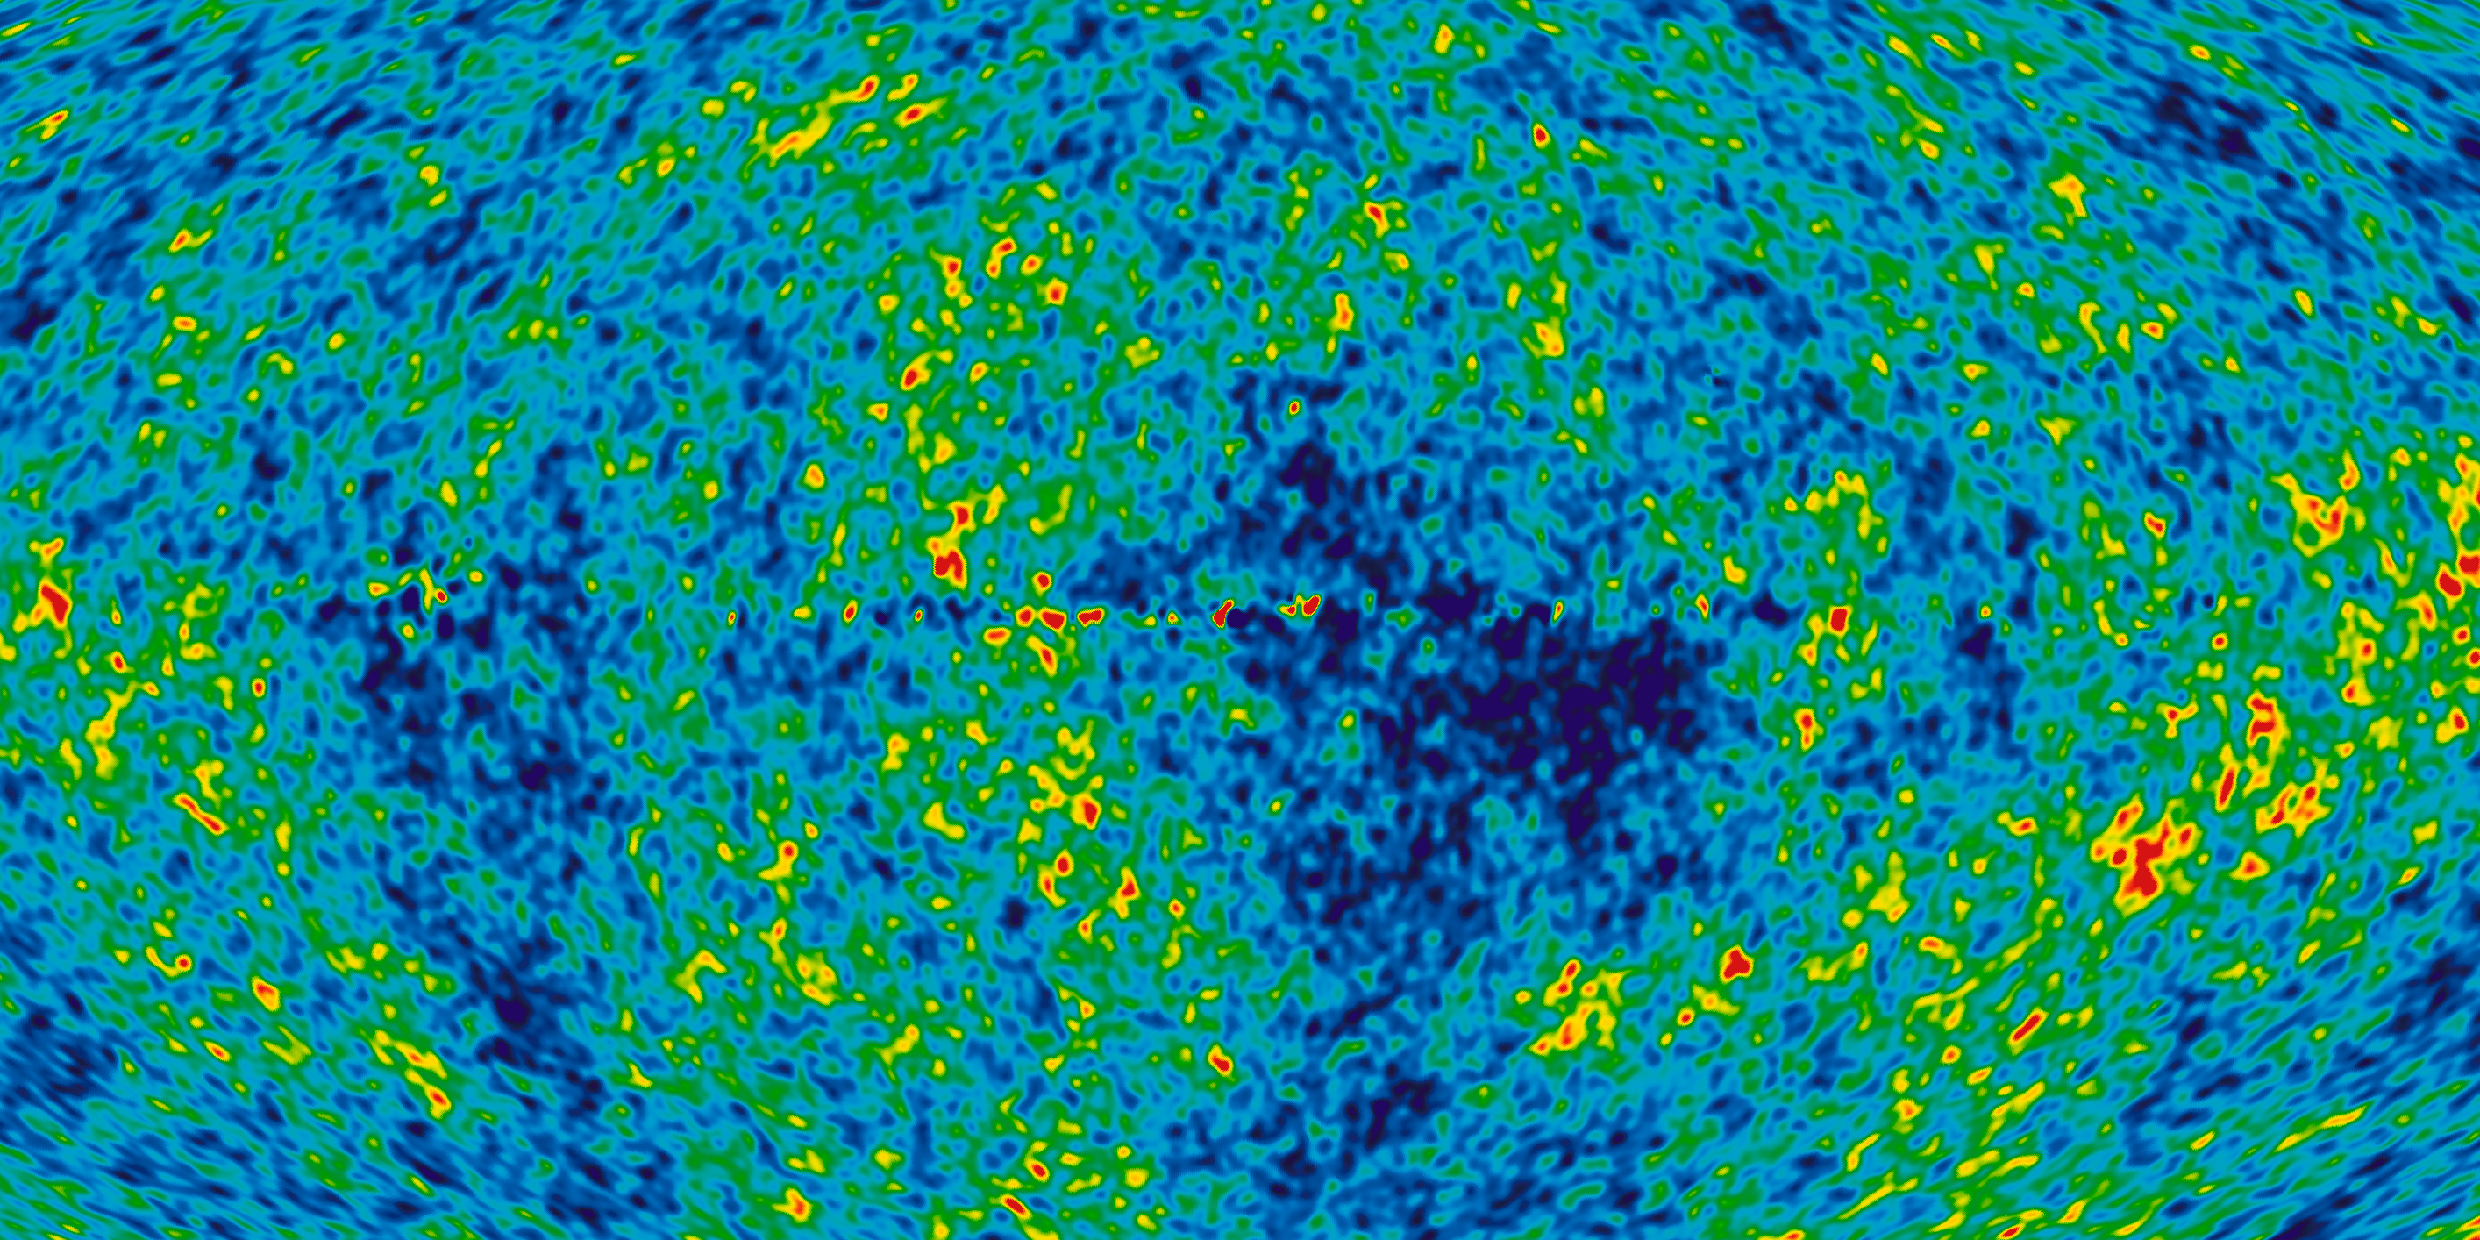 Imagery from the WMAP satellite of the early universe